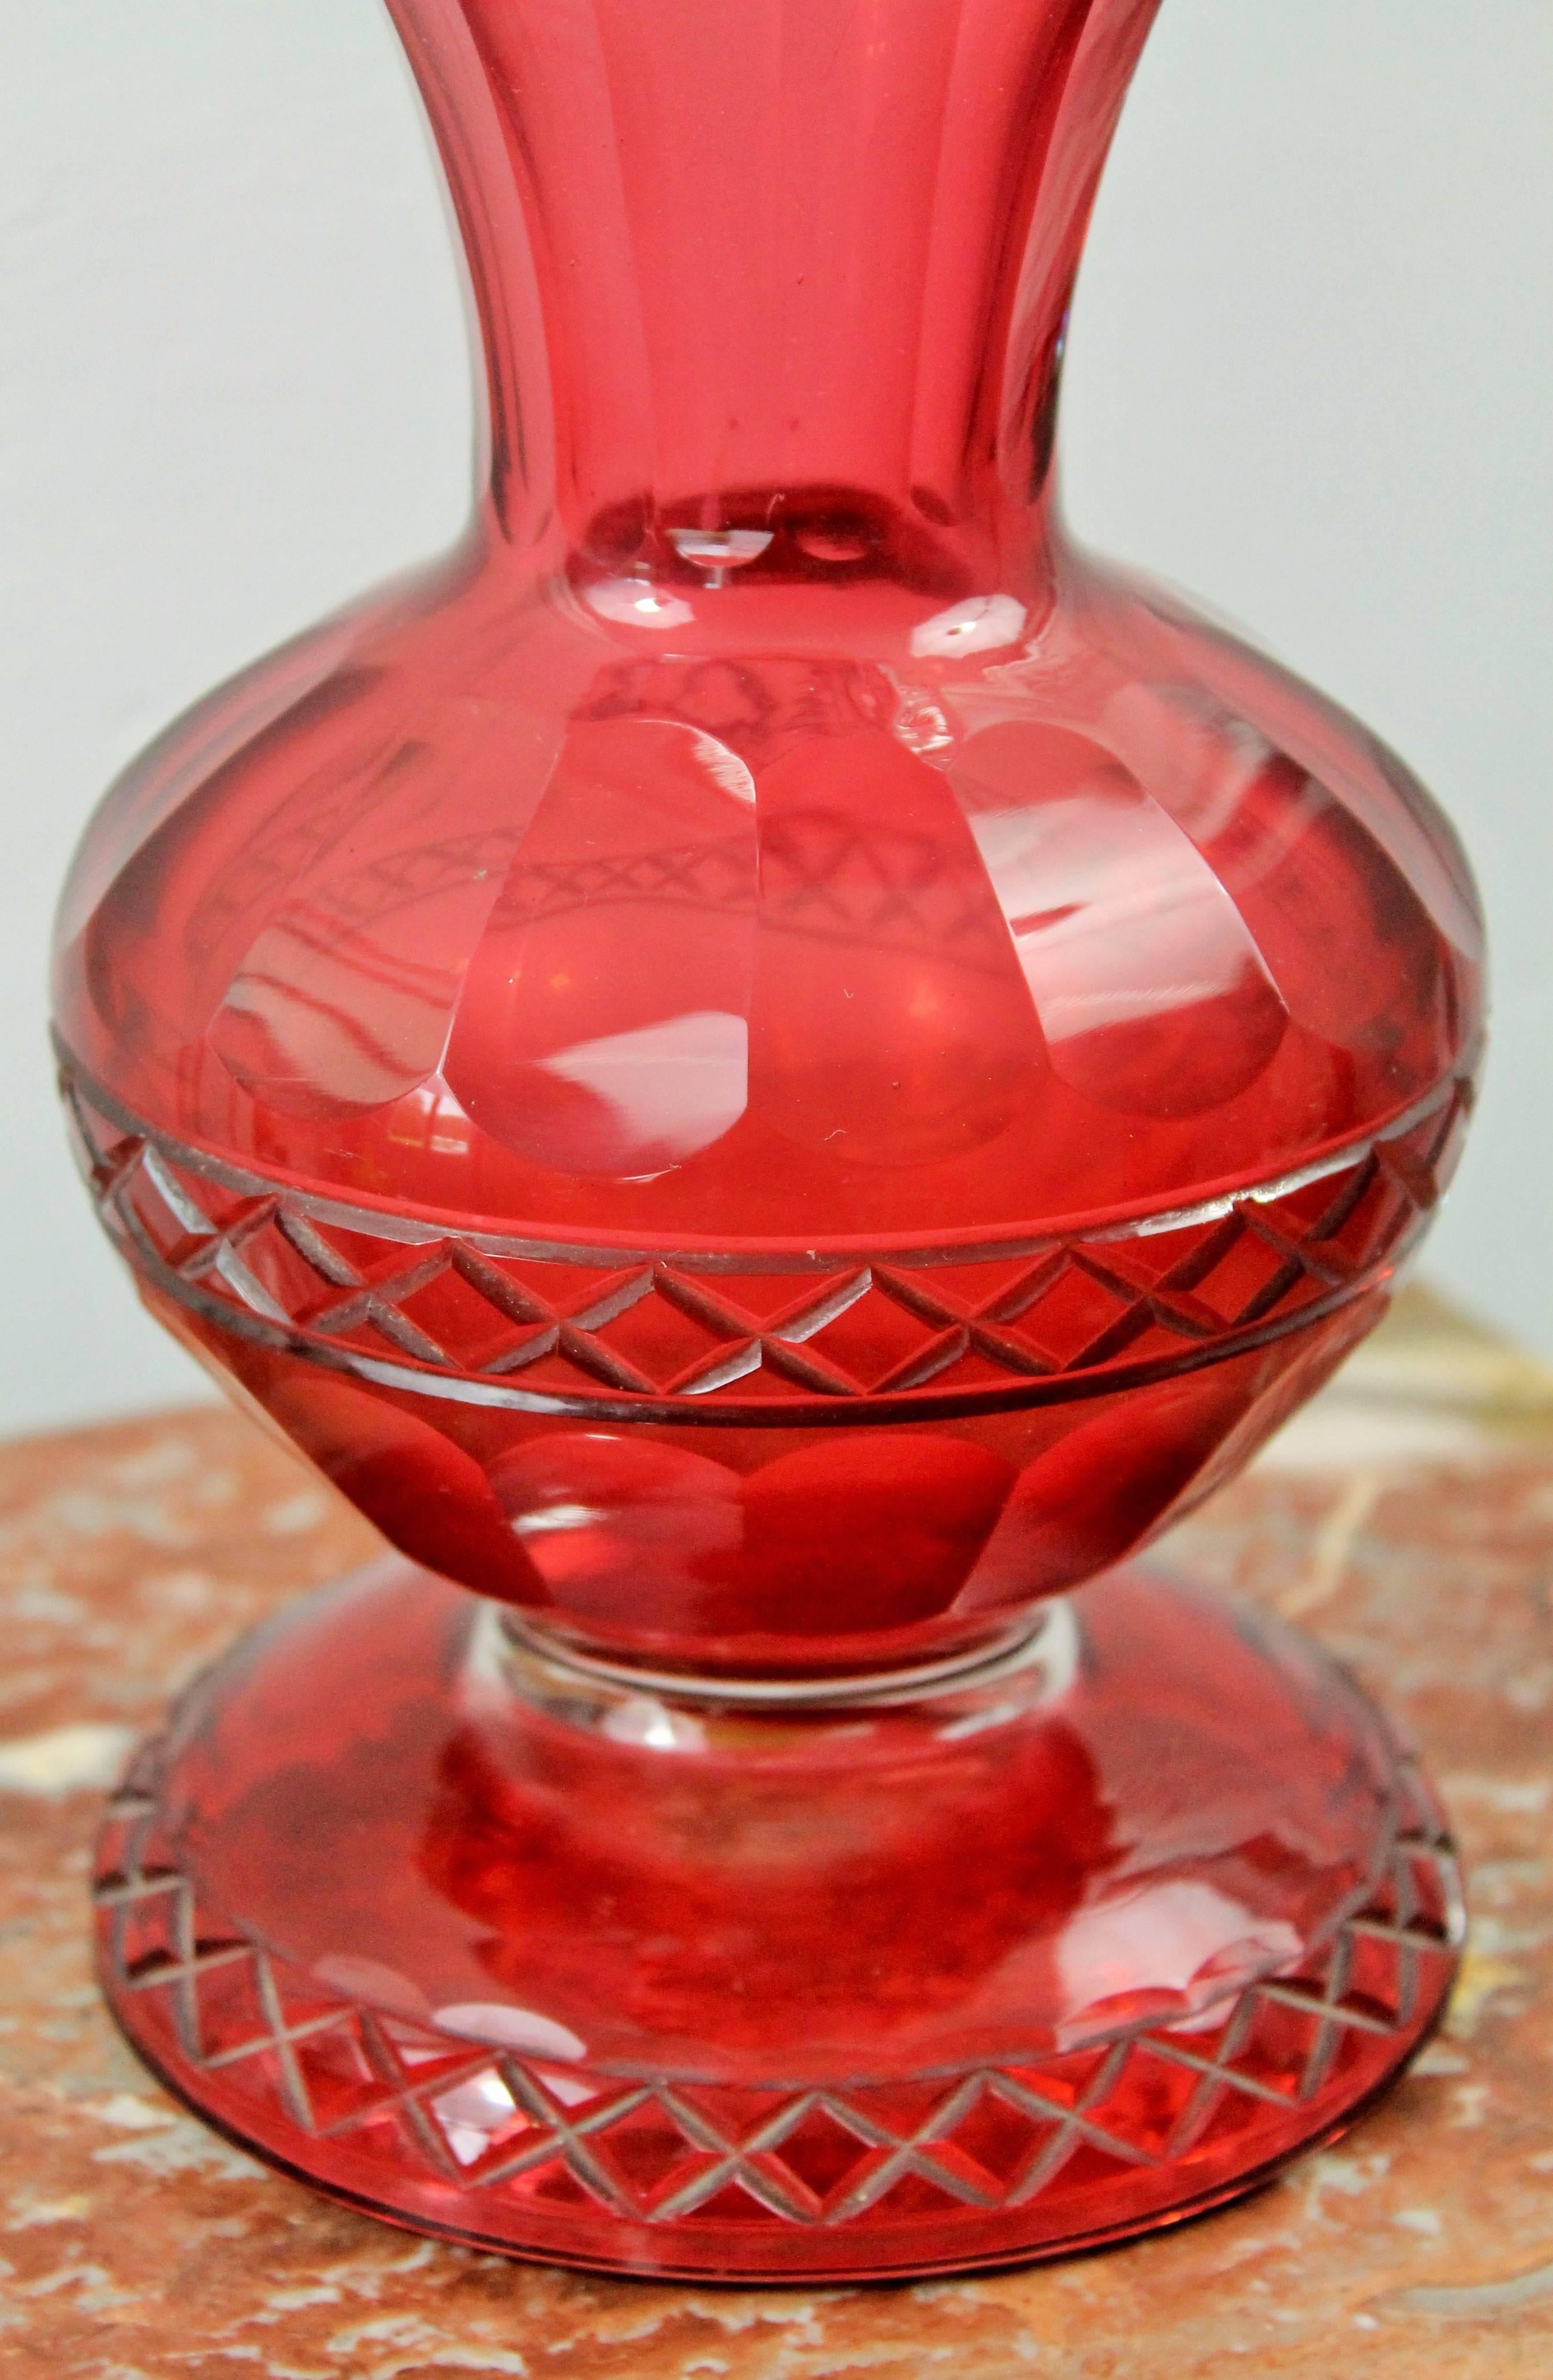 Beautiful vase in red Bohemian crystal, mouth blown and chiseled on the wheel, decorated with diamonds and vine leaves.
Very nice vase, cut for an elegant interior decoration.

The red color was obtained by means of metallic oxides such as lead